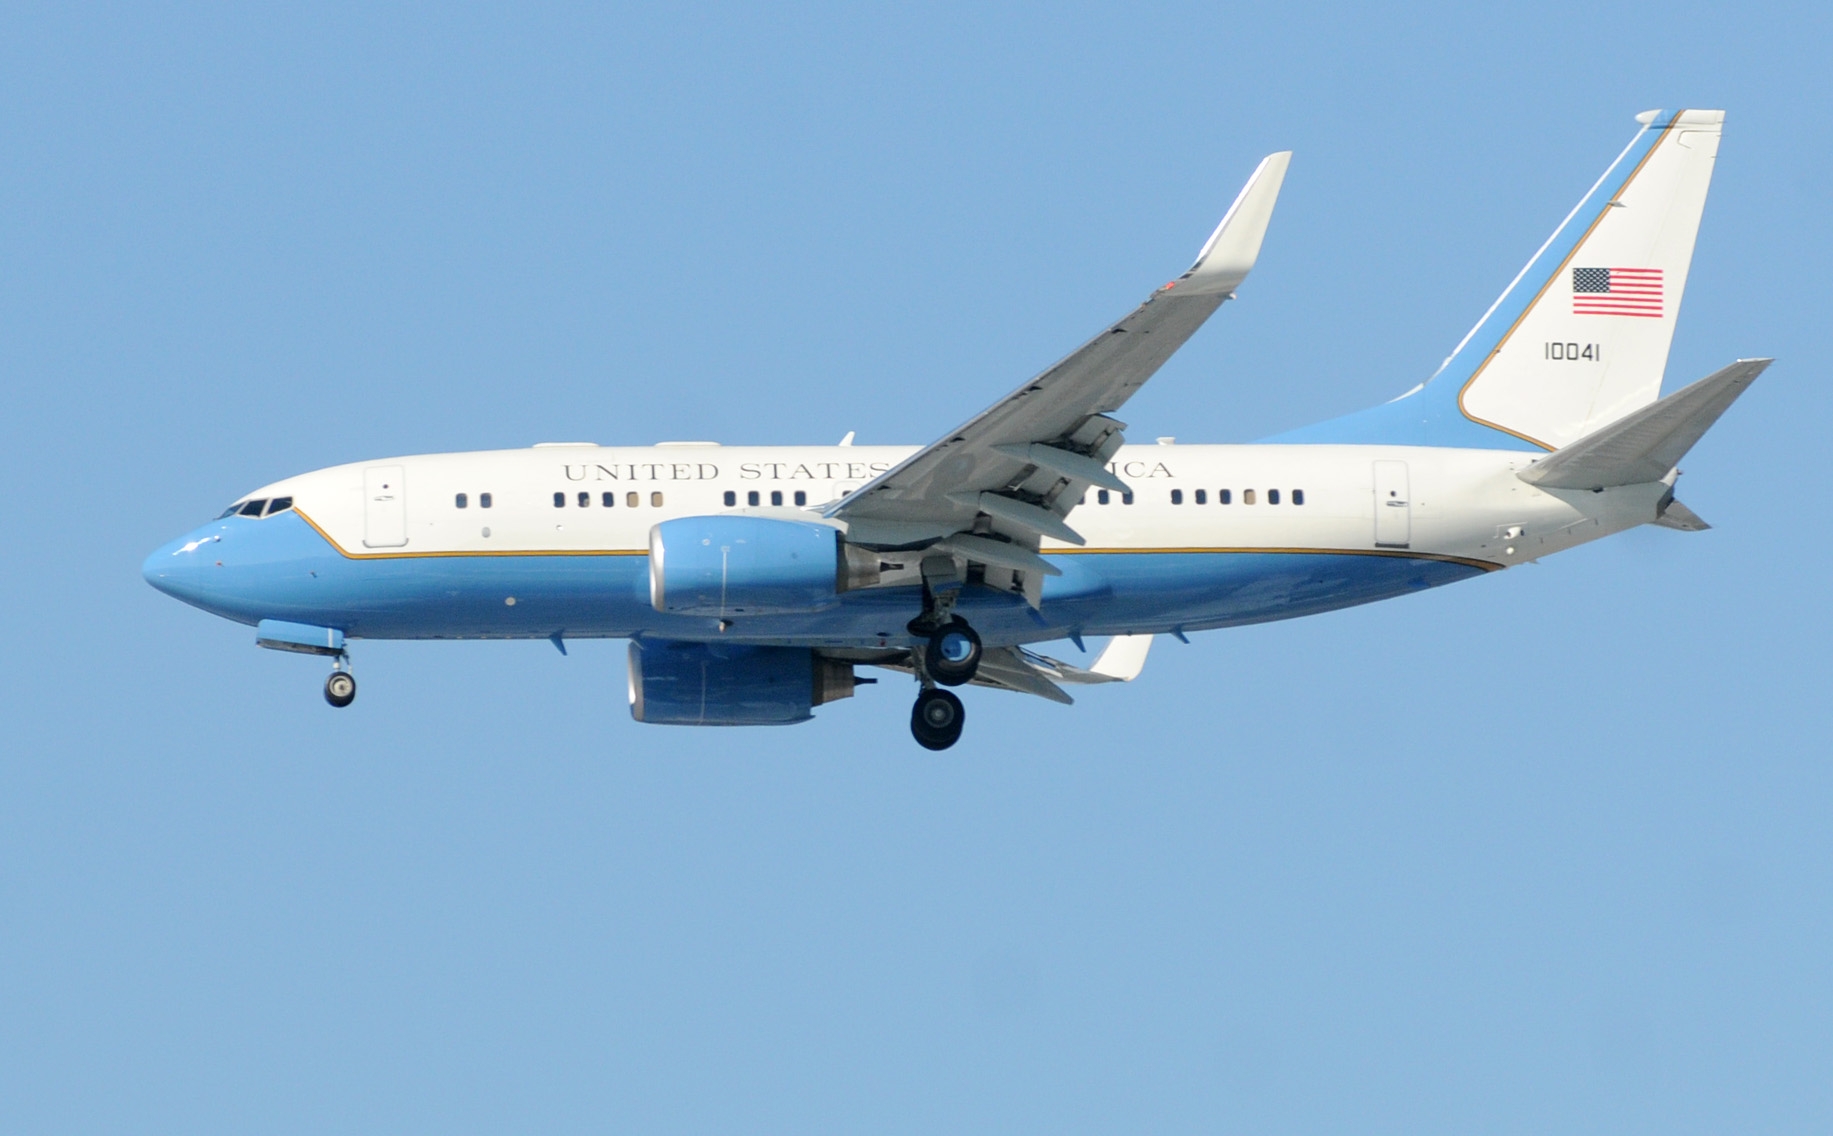 MyReporter.com Why is there a blue and white government plane flying ...